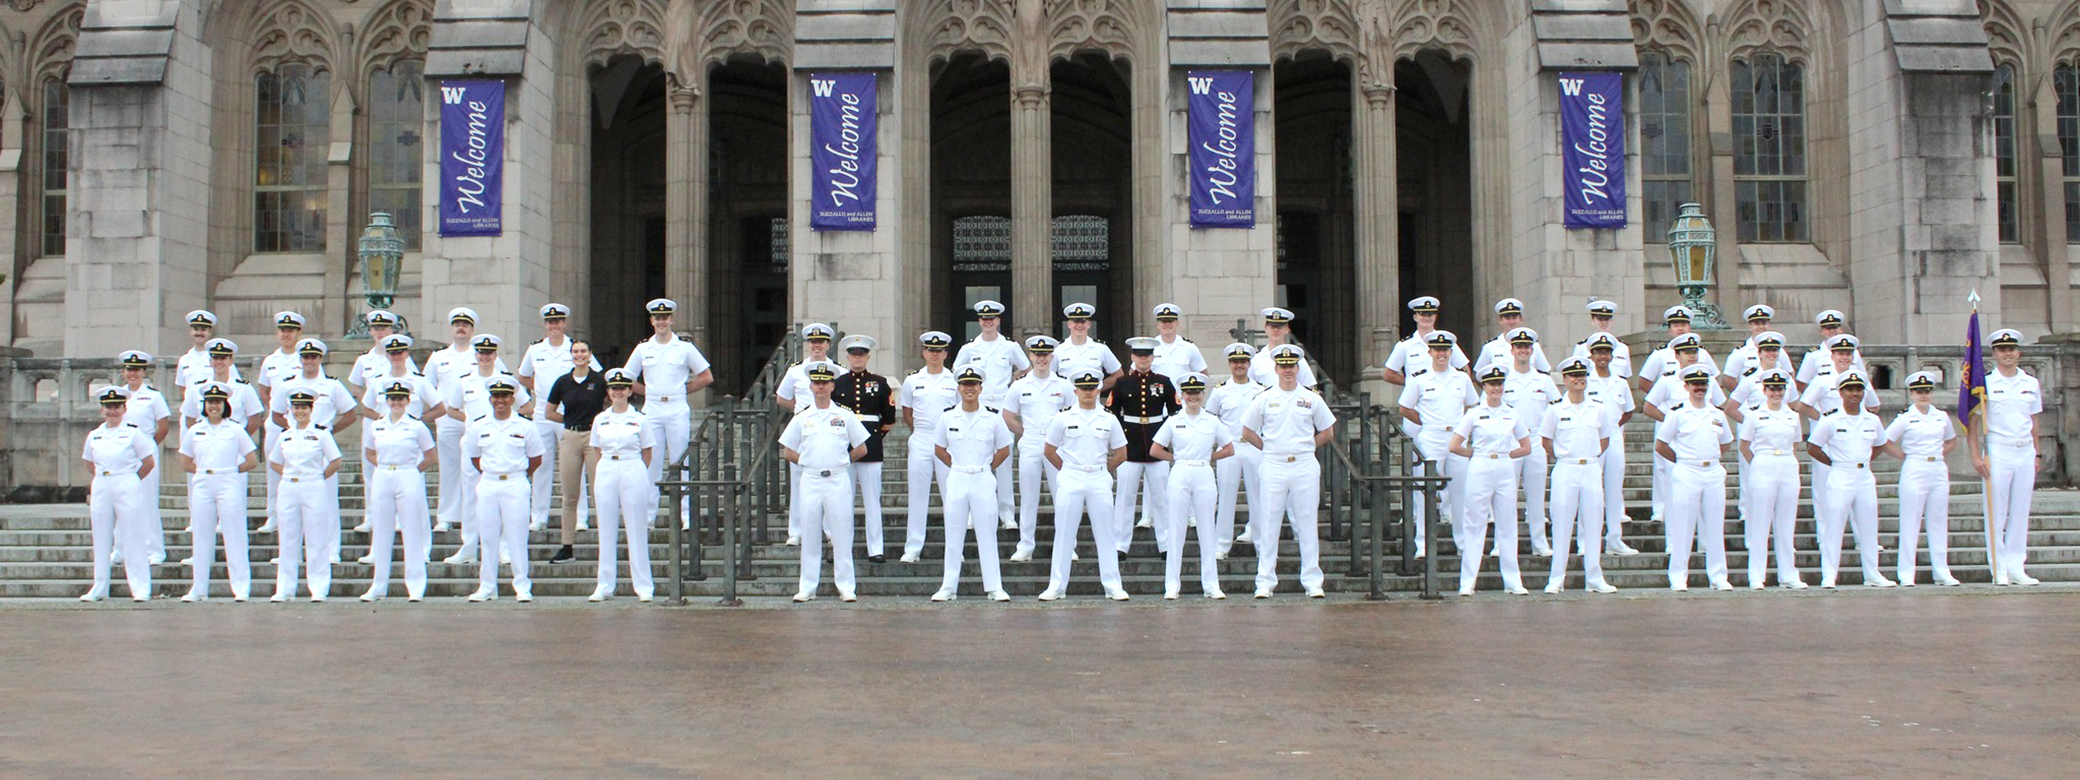 Navy ROTC students in Navy whites outside Suzzallo Library